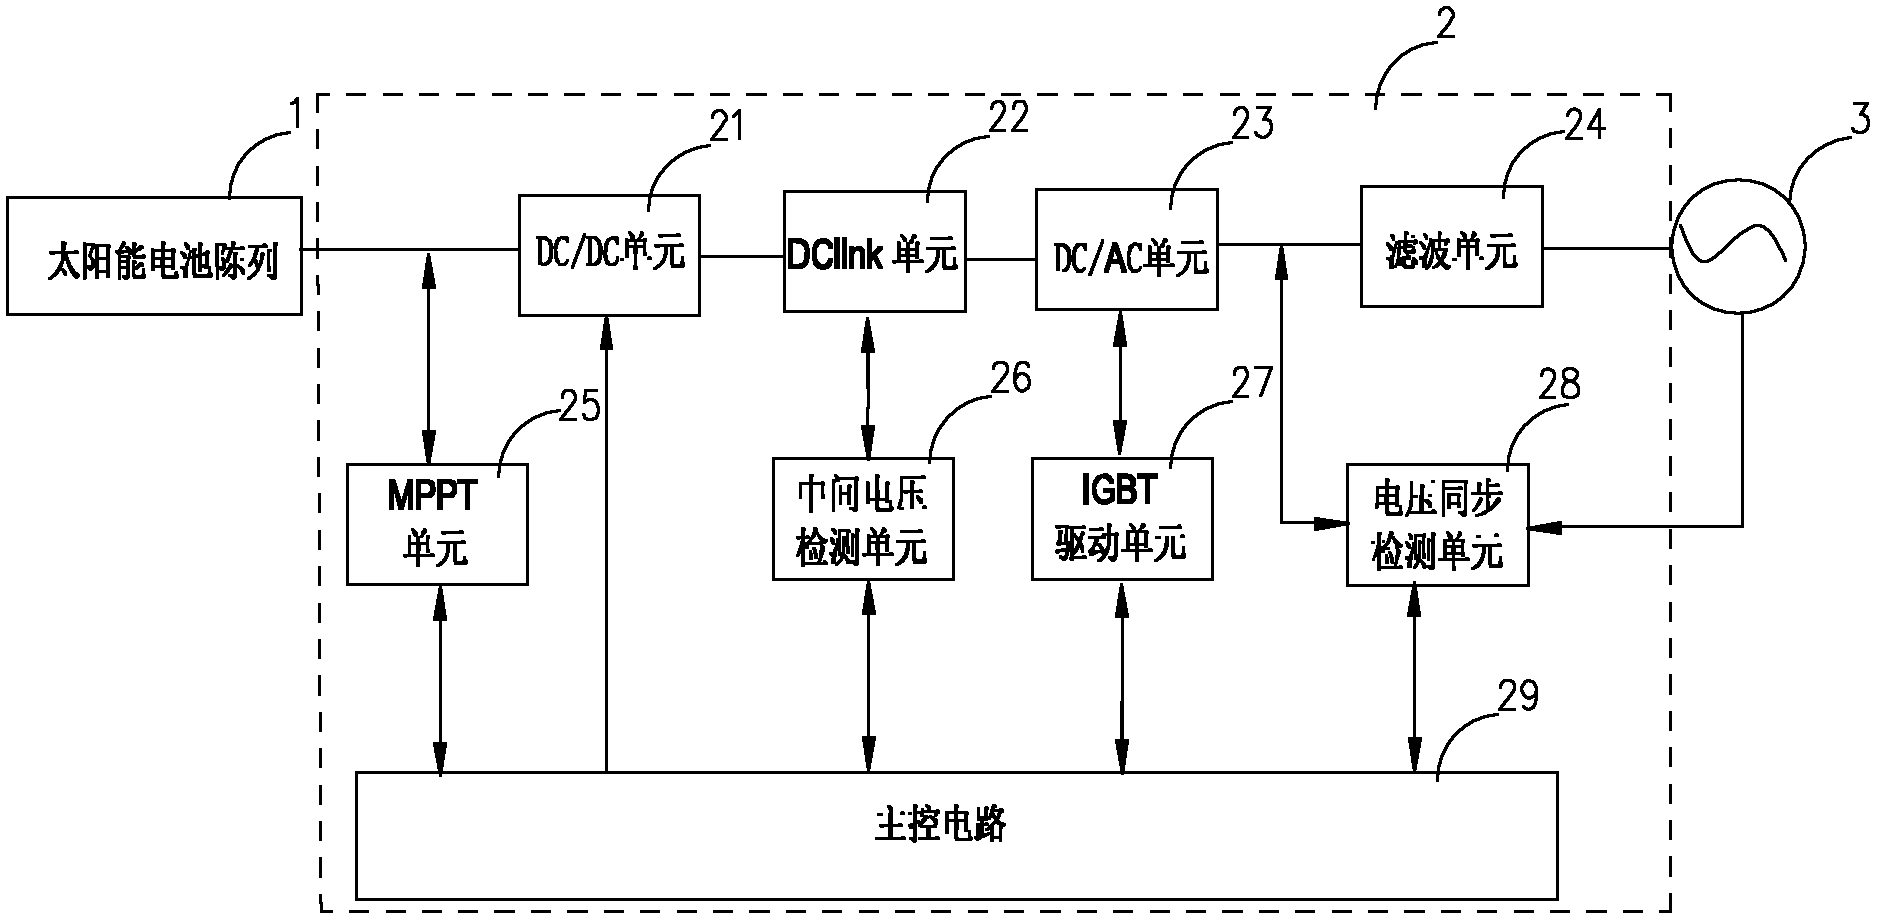 Solar photovoltaic grid-connected inverter and solar inverter air conditioning system